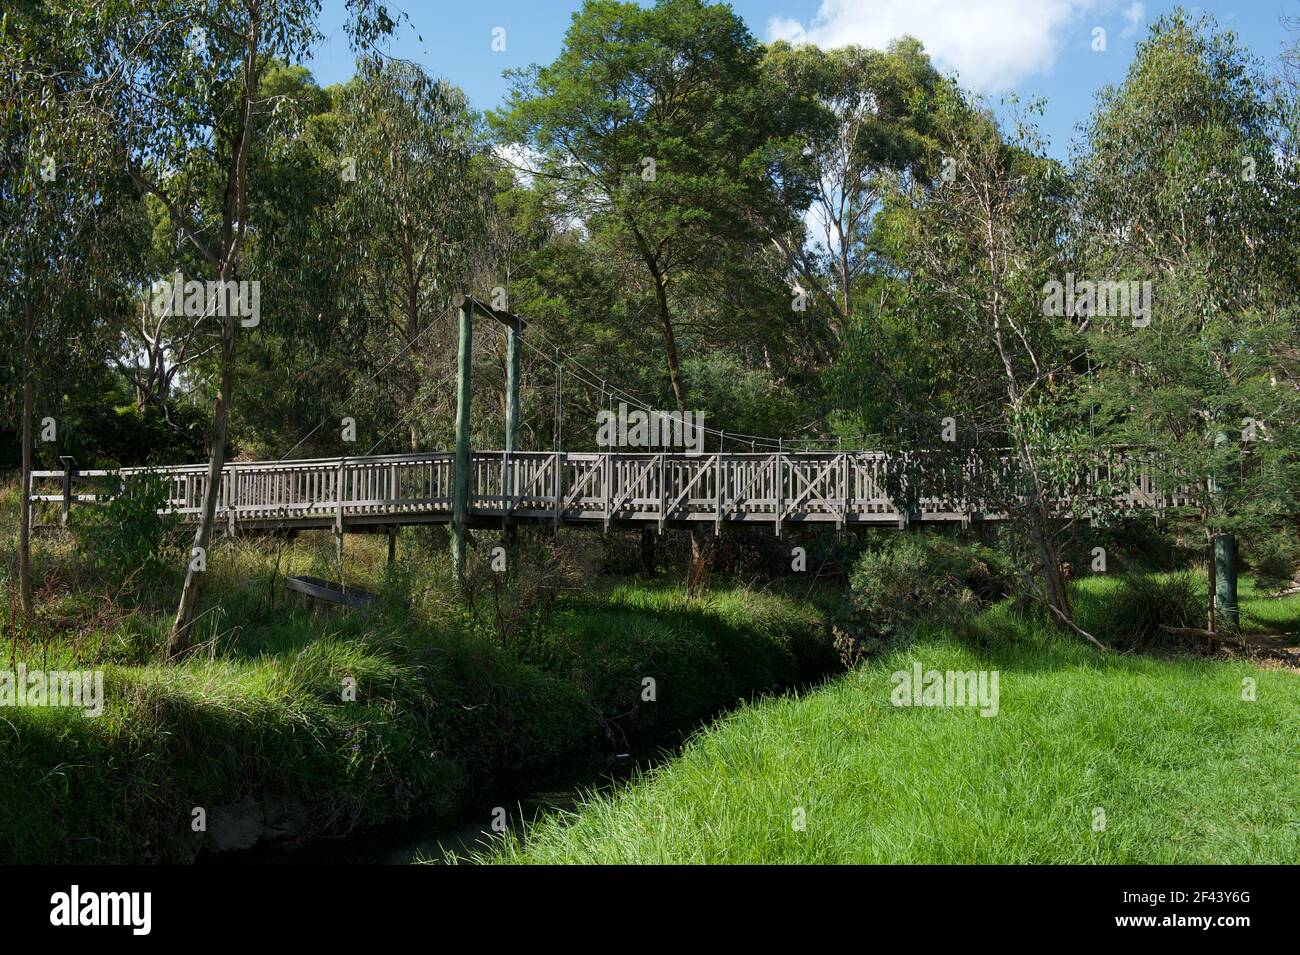 A wooden suspension bridge crosses the Mullum Mullum Creek near Rupert Street in Ringwood, Victoria. All the other timber bridges have been replaced. Stock Photo